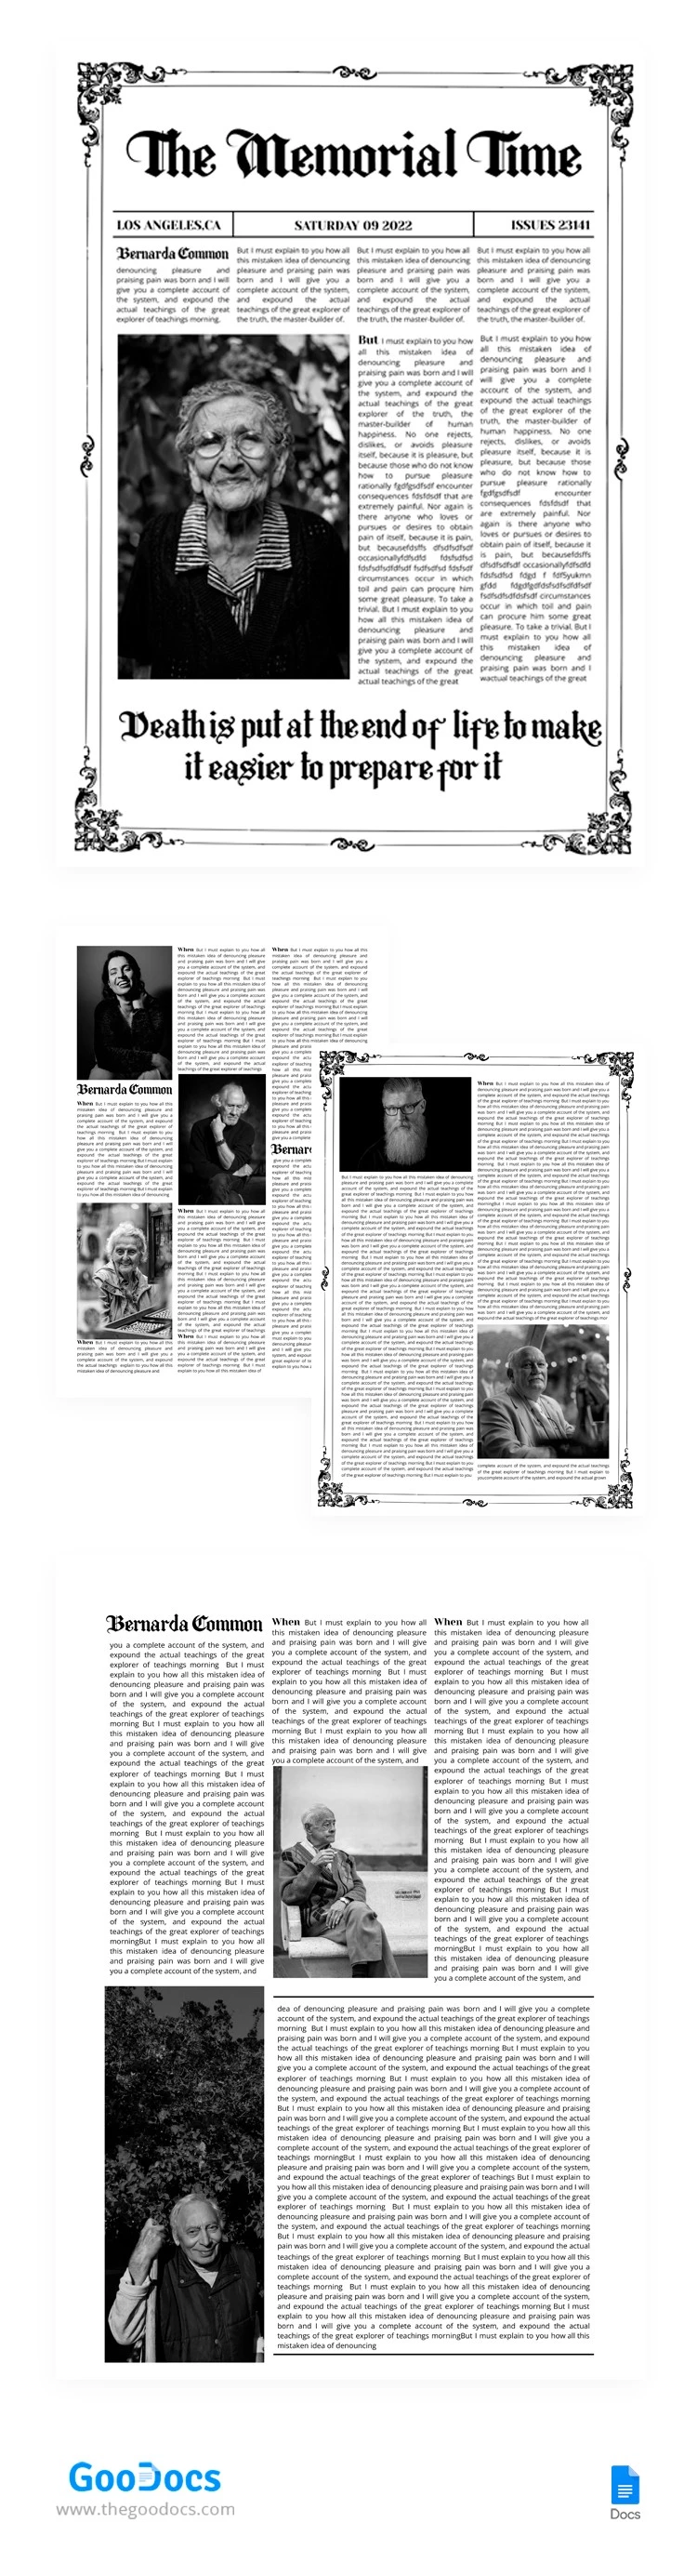 Le journal "The Memorial Time" - free Google Docs Template - 10065014